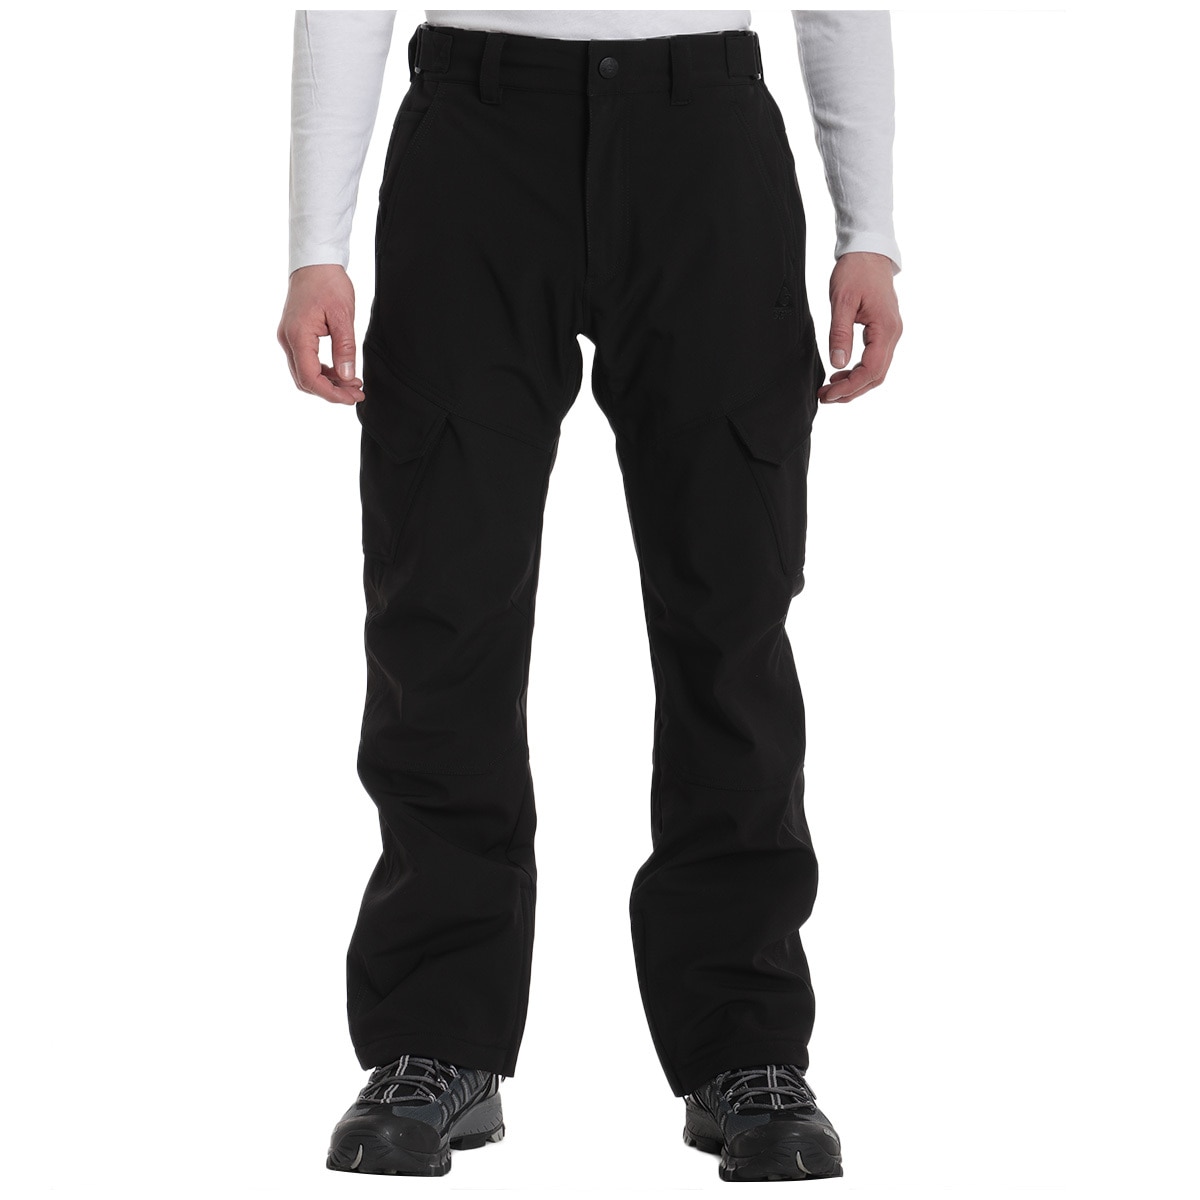 2016 MENS GERRY FLEECE LINED SNOW PANTS BOARDER SKI PANT 4 WAY STRETCH VARIETY 